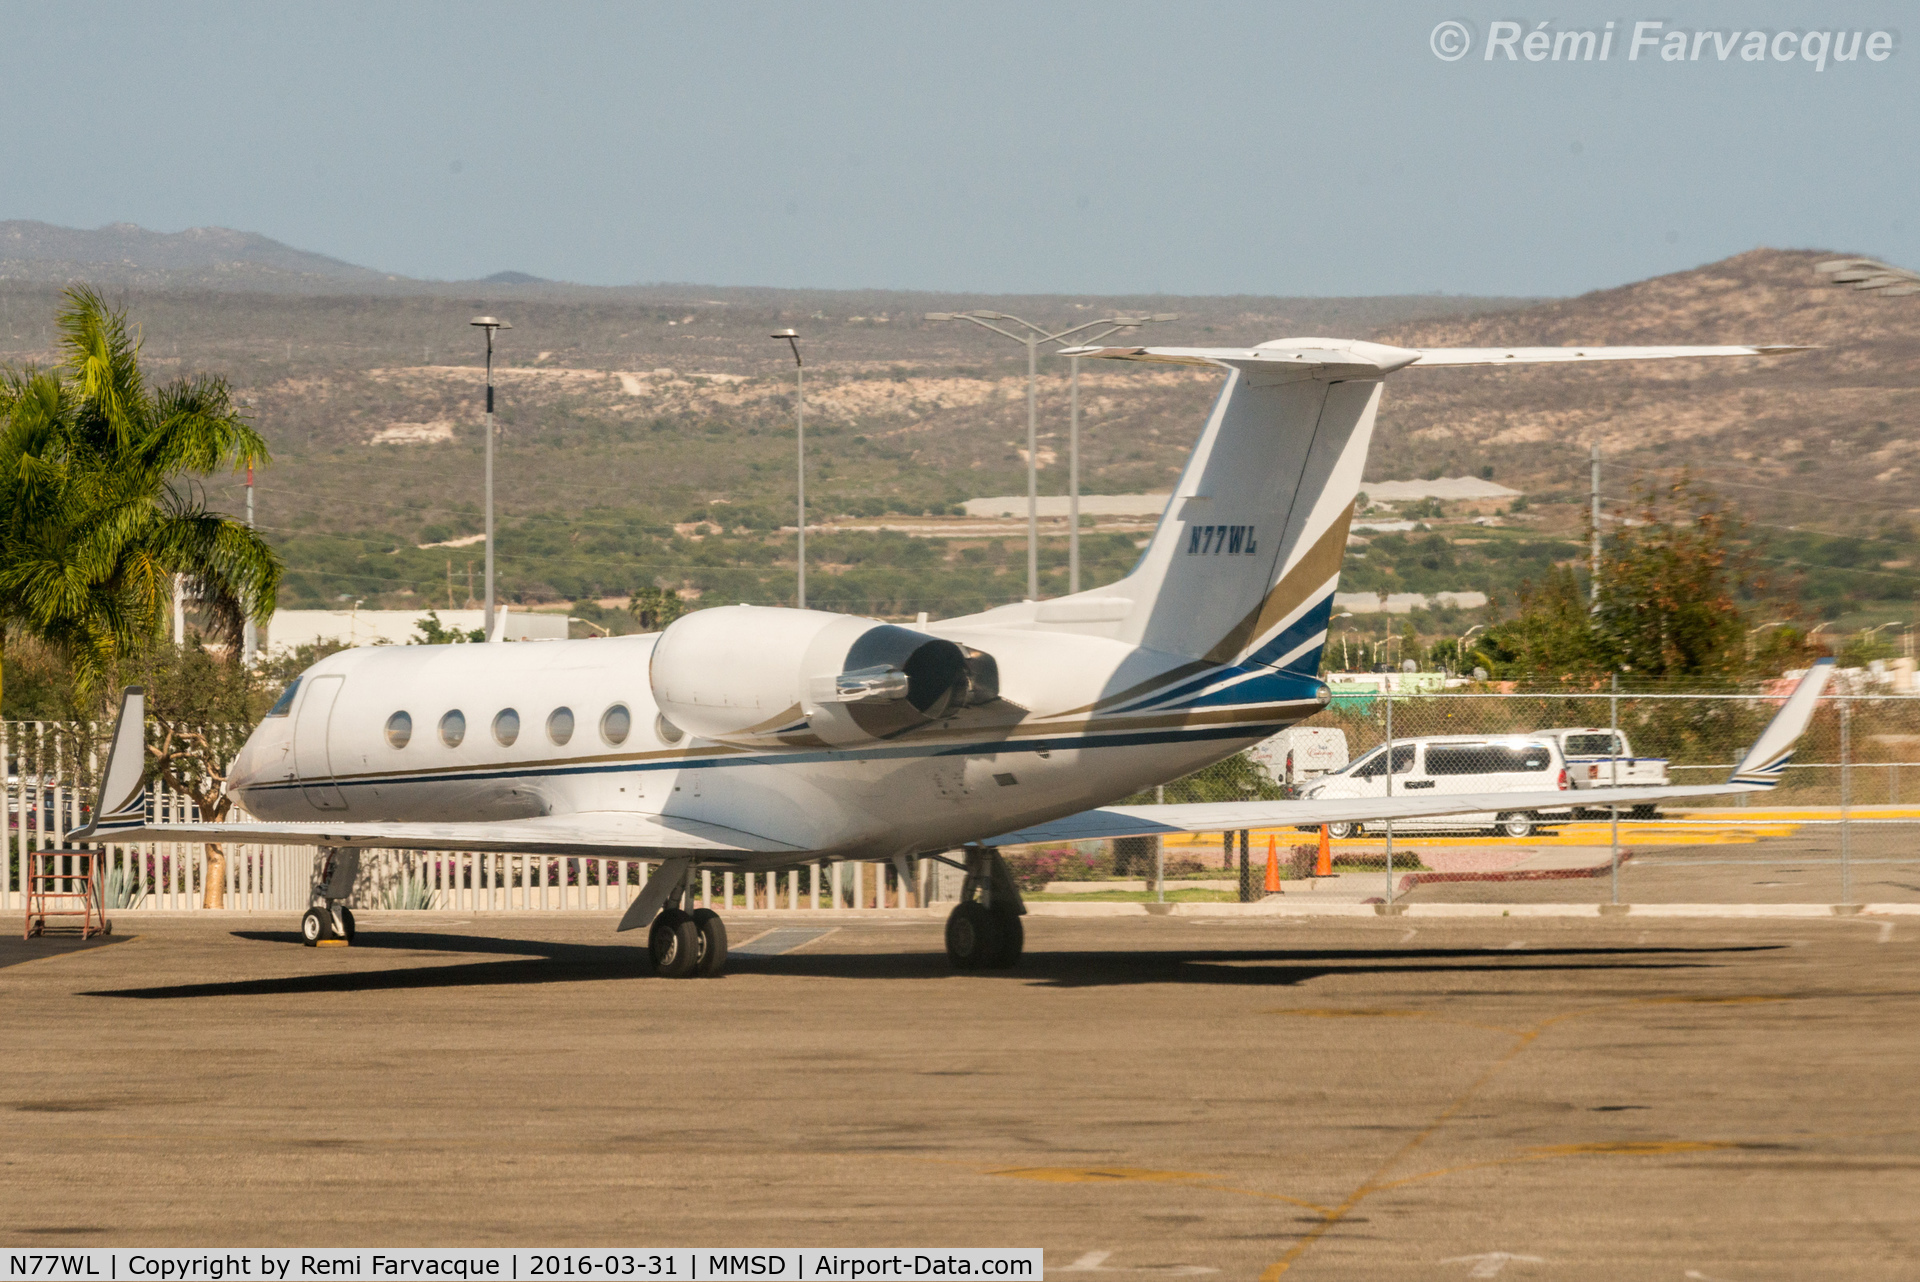 N77WL, 1990 Gulfstream Aerospace G-IV C/N 1140, Parked in executive jet area.